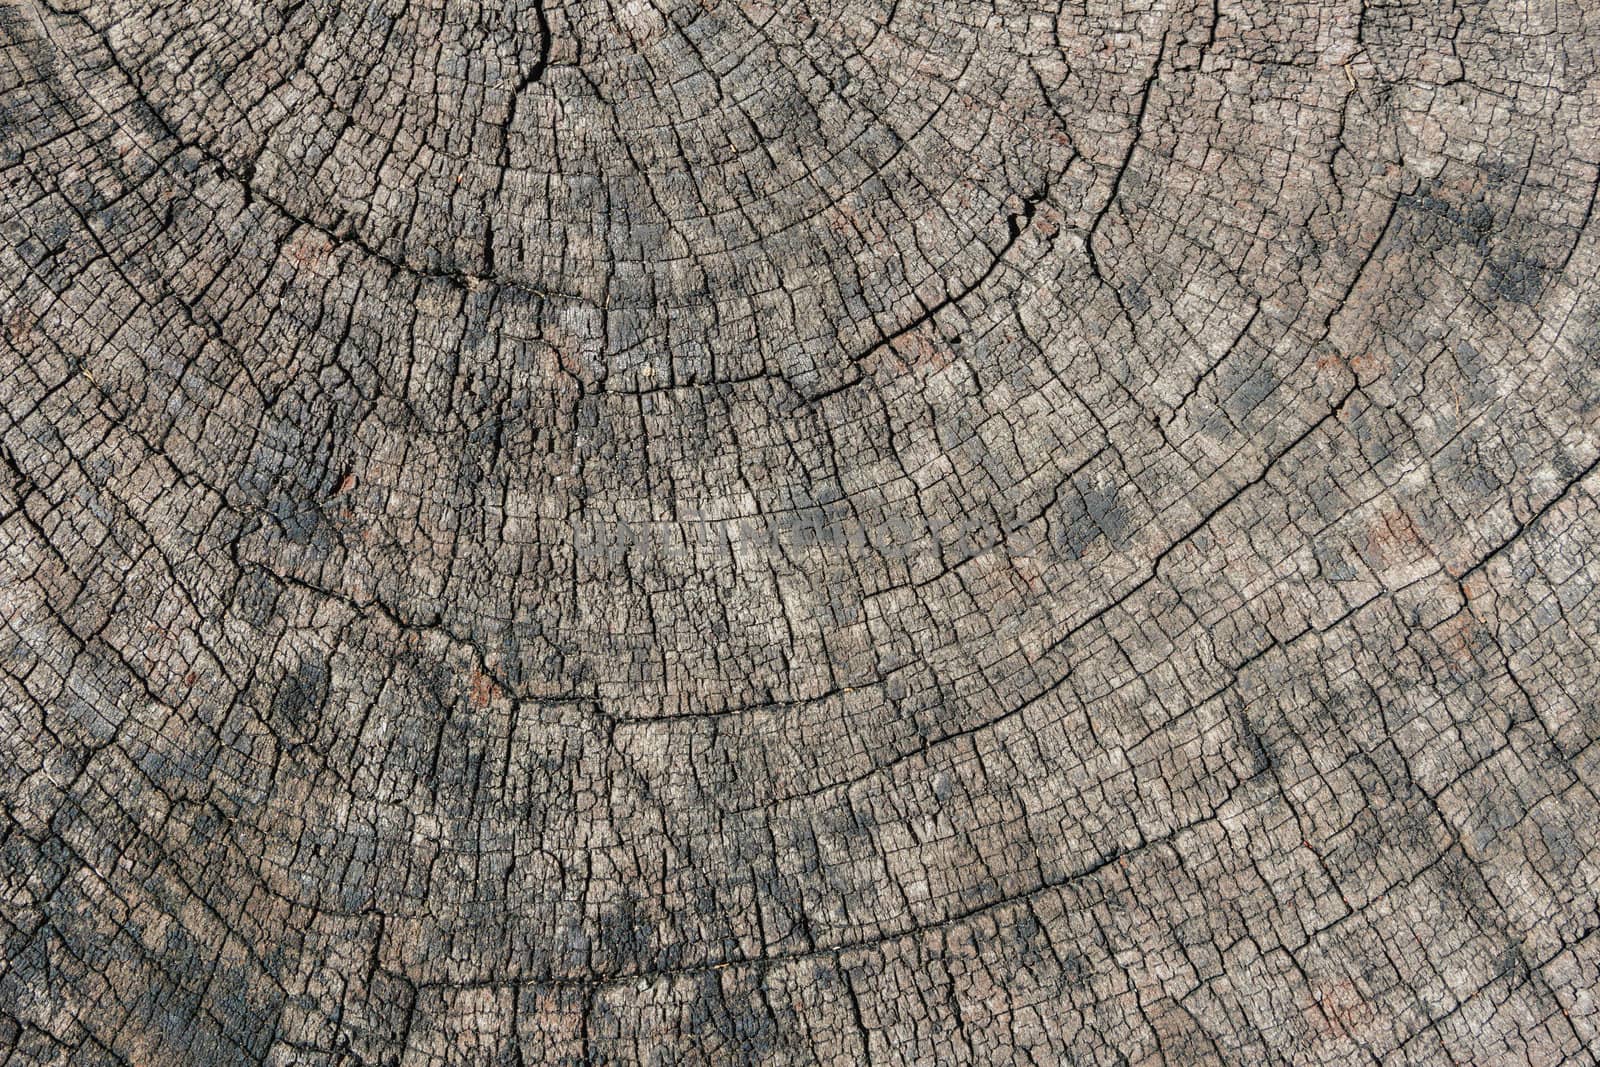 Texture of the old cut down tree